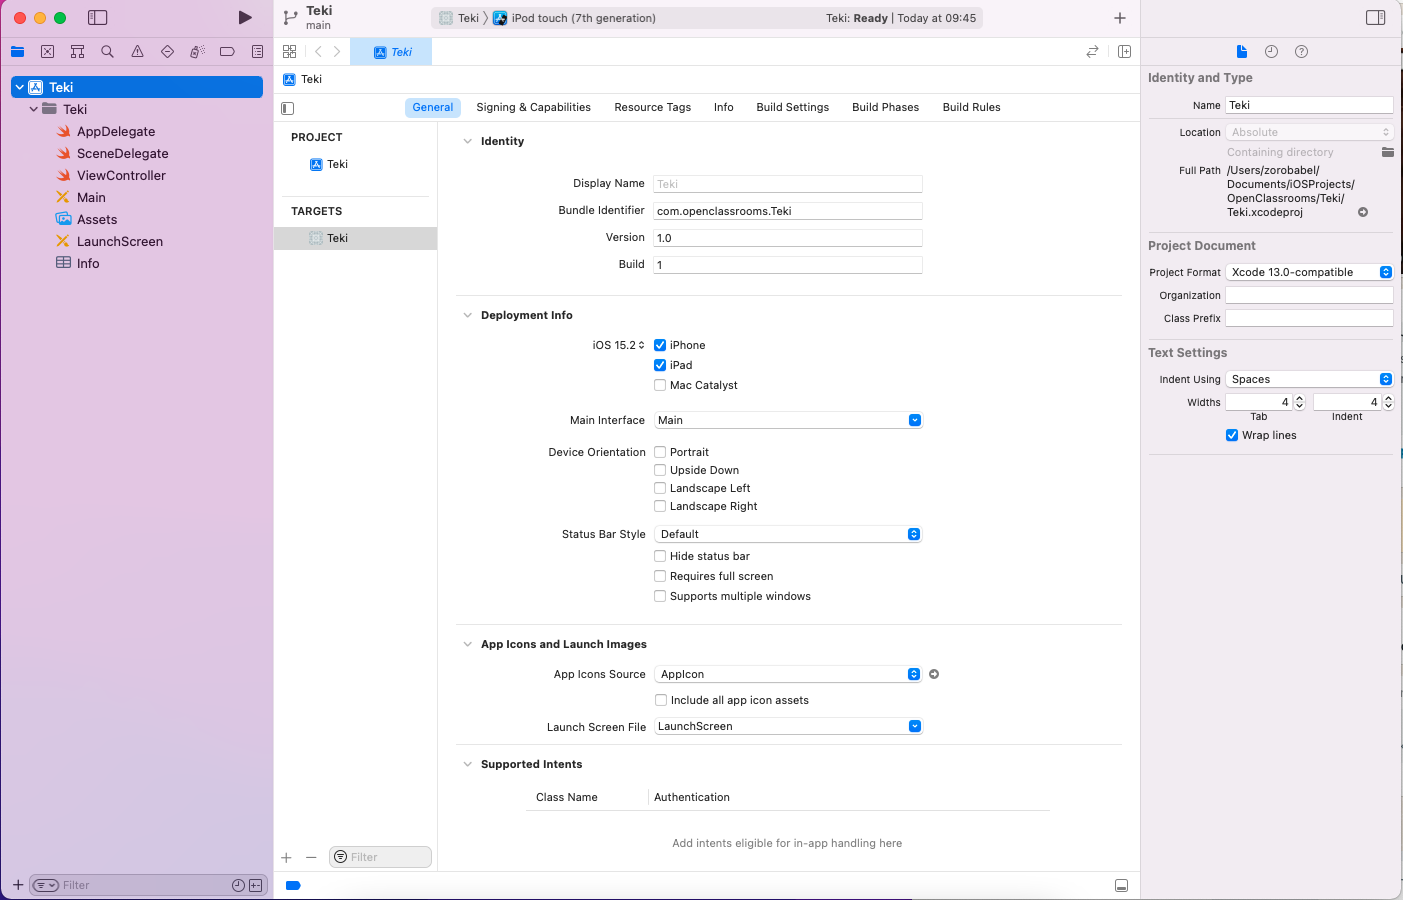 L'interface de Xcode contient une section Identify, une section Deployment info, une section App icons and Launch images, et une section Supported intents